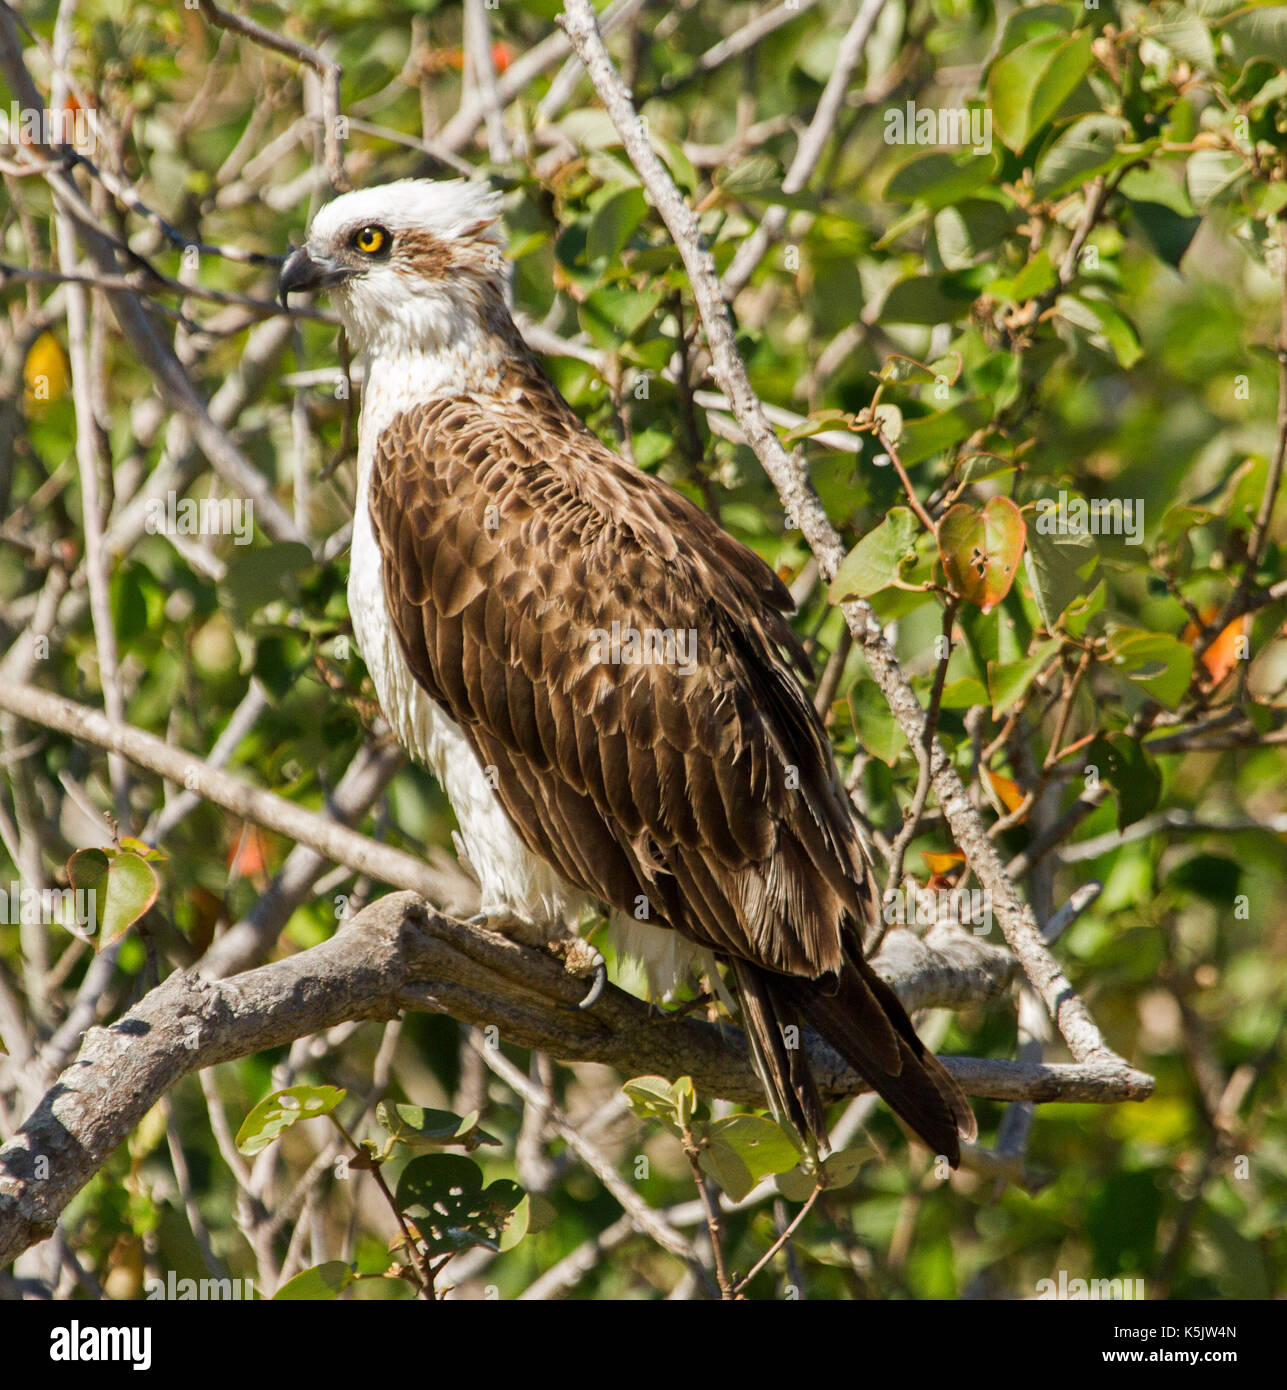 Osprey, Pandion cristatus, with alert expression, perched on branch against background of emerald foliage at Hervey Bay, Qld, Australia Stock Photo